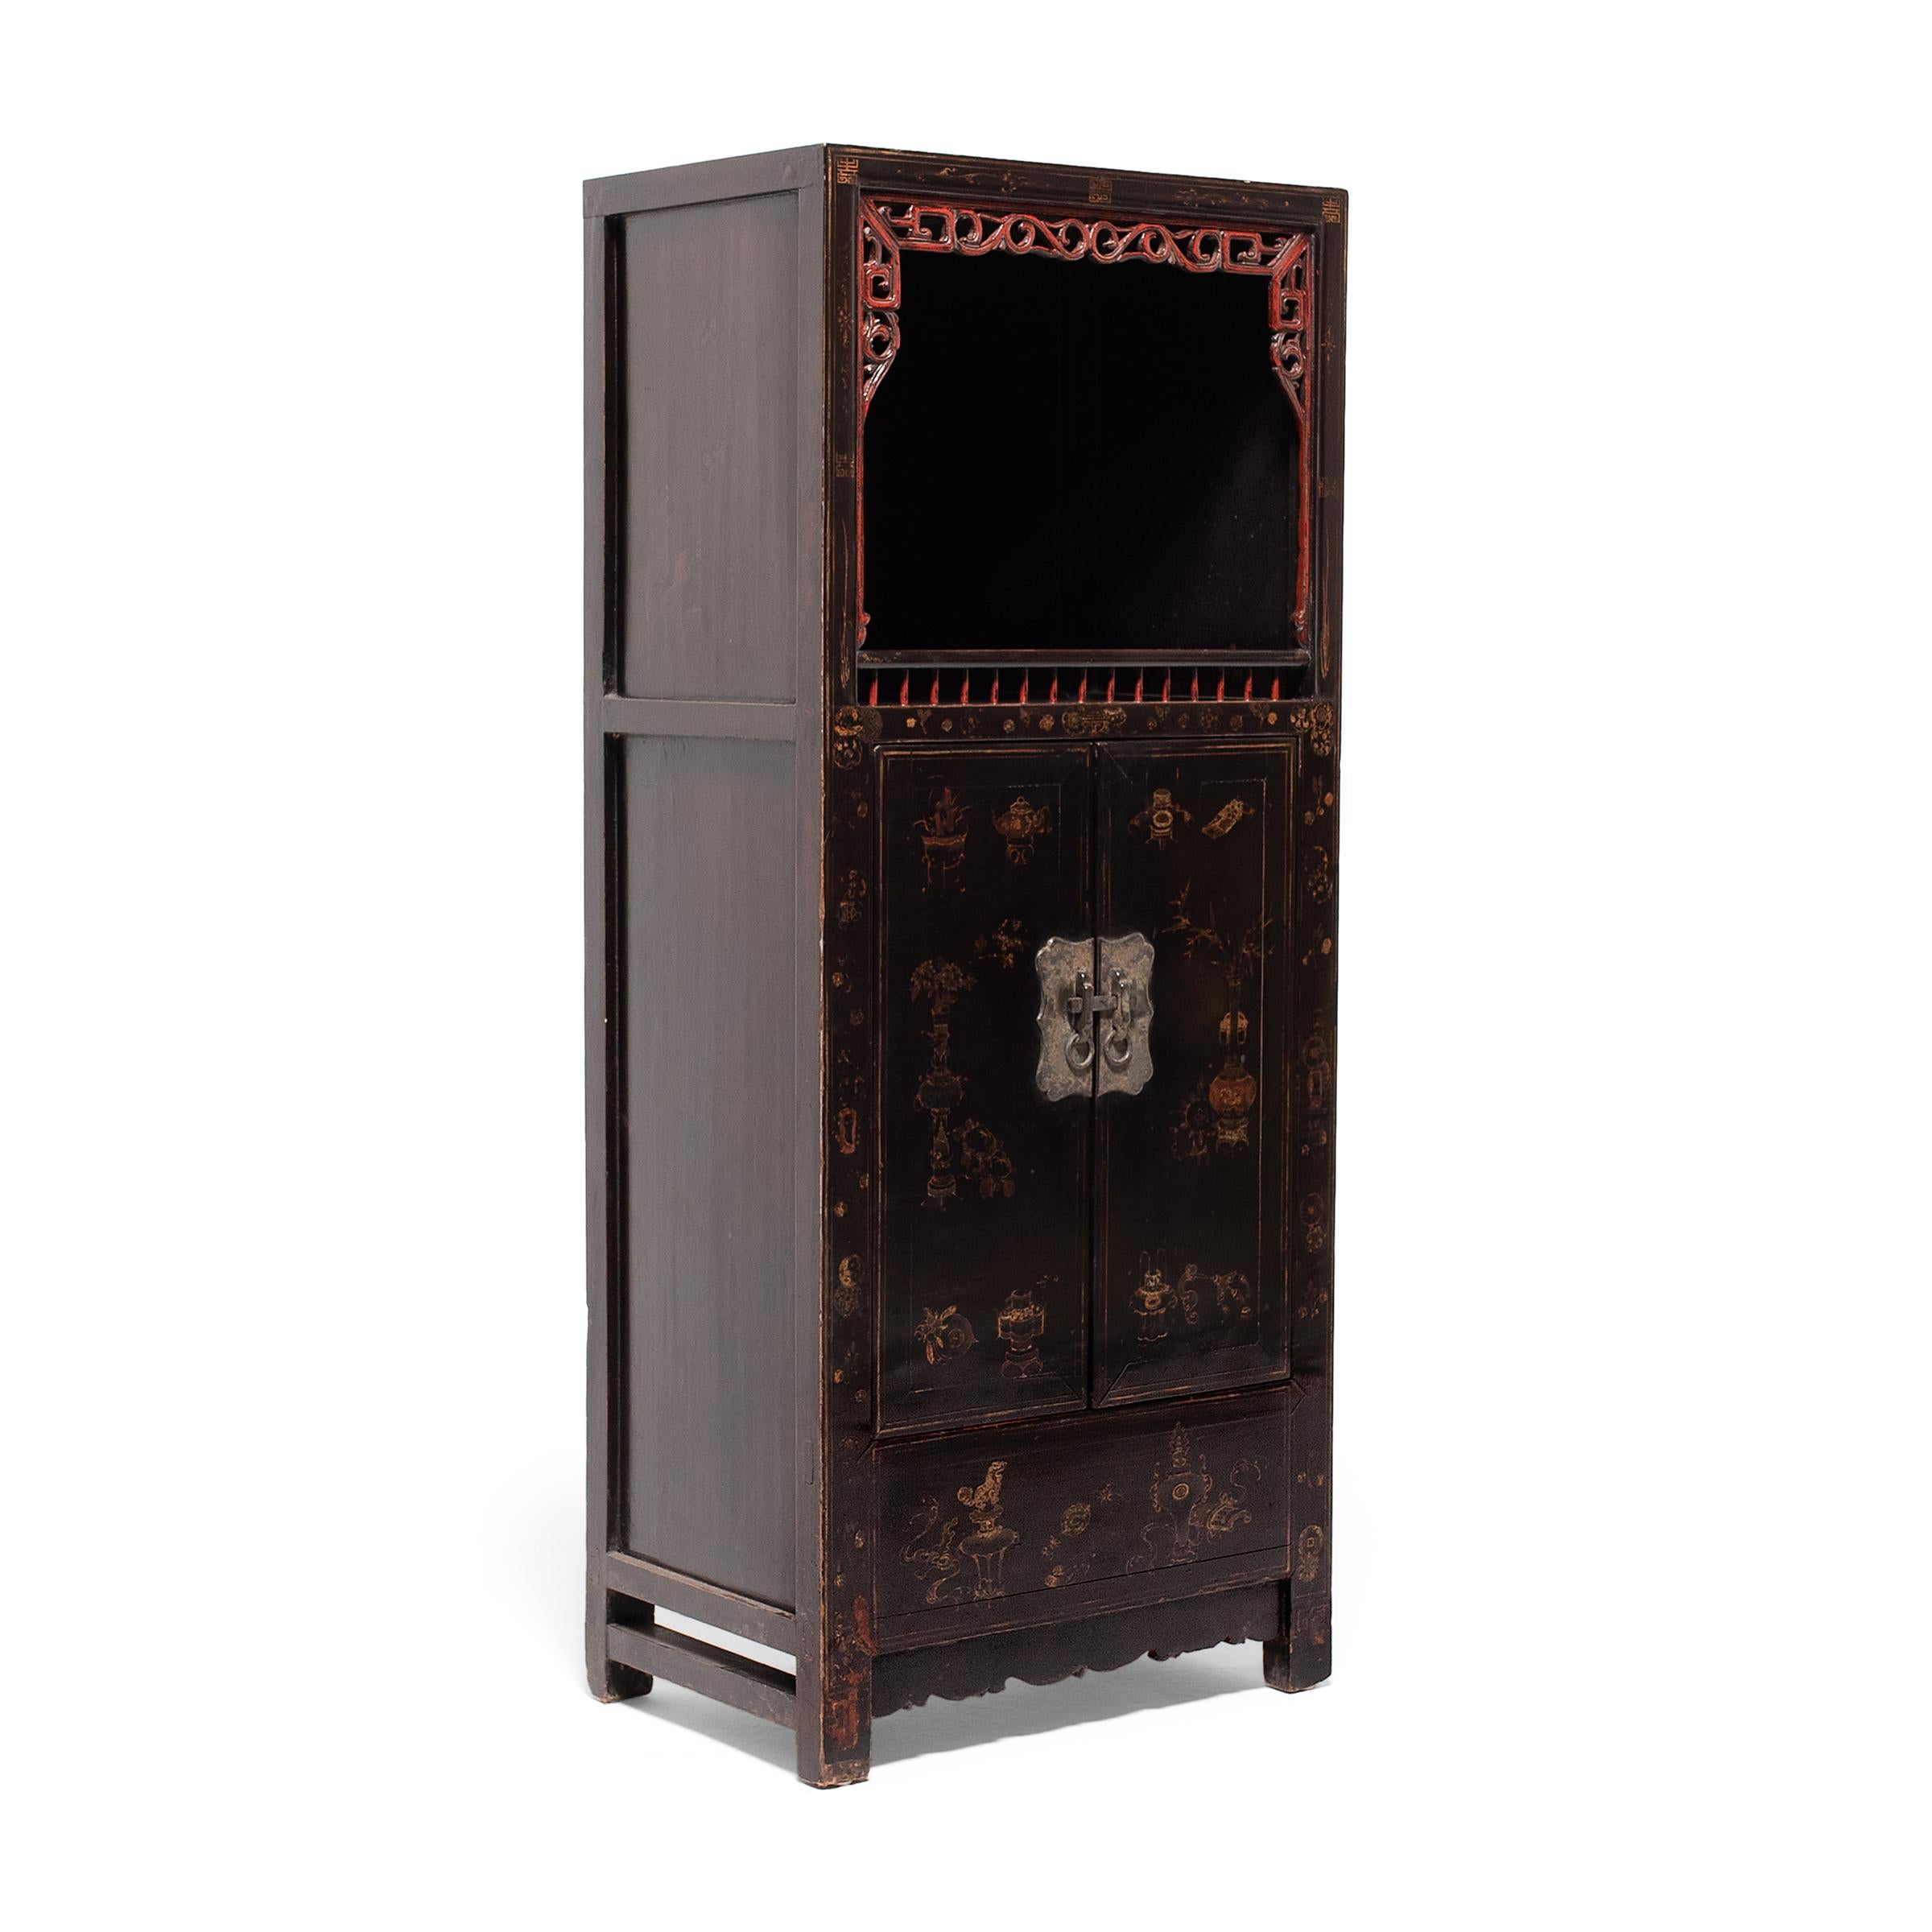 This lacquered display cabinet from Shanxi province was crafted in the mid-19th century using traditional mortise-and-tenon joinery methods. The enclosed lower half was used for general storage and the open upper shelf was used to display precious